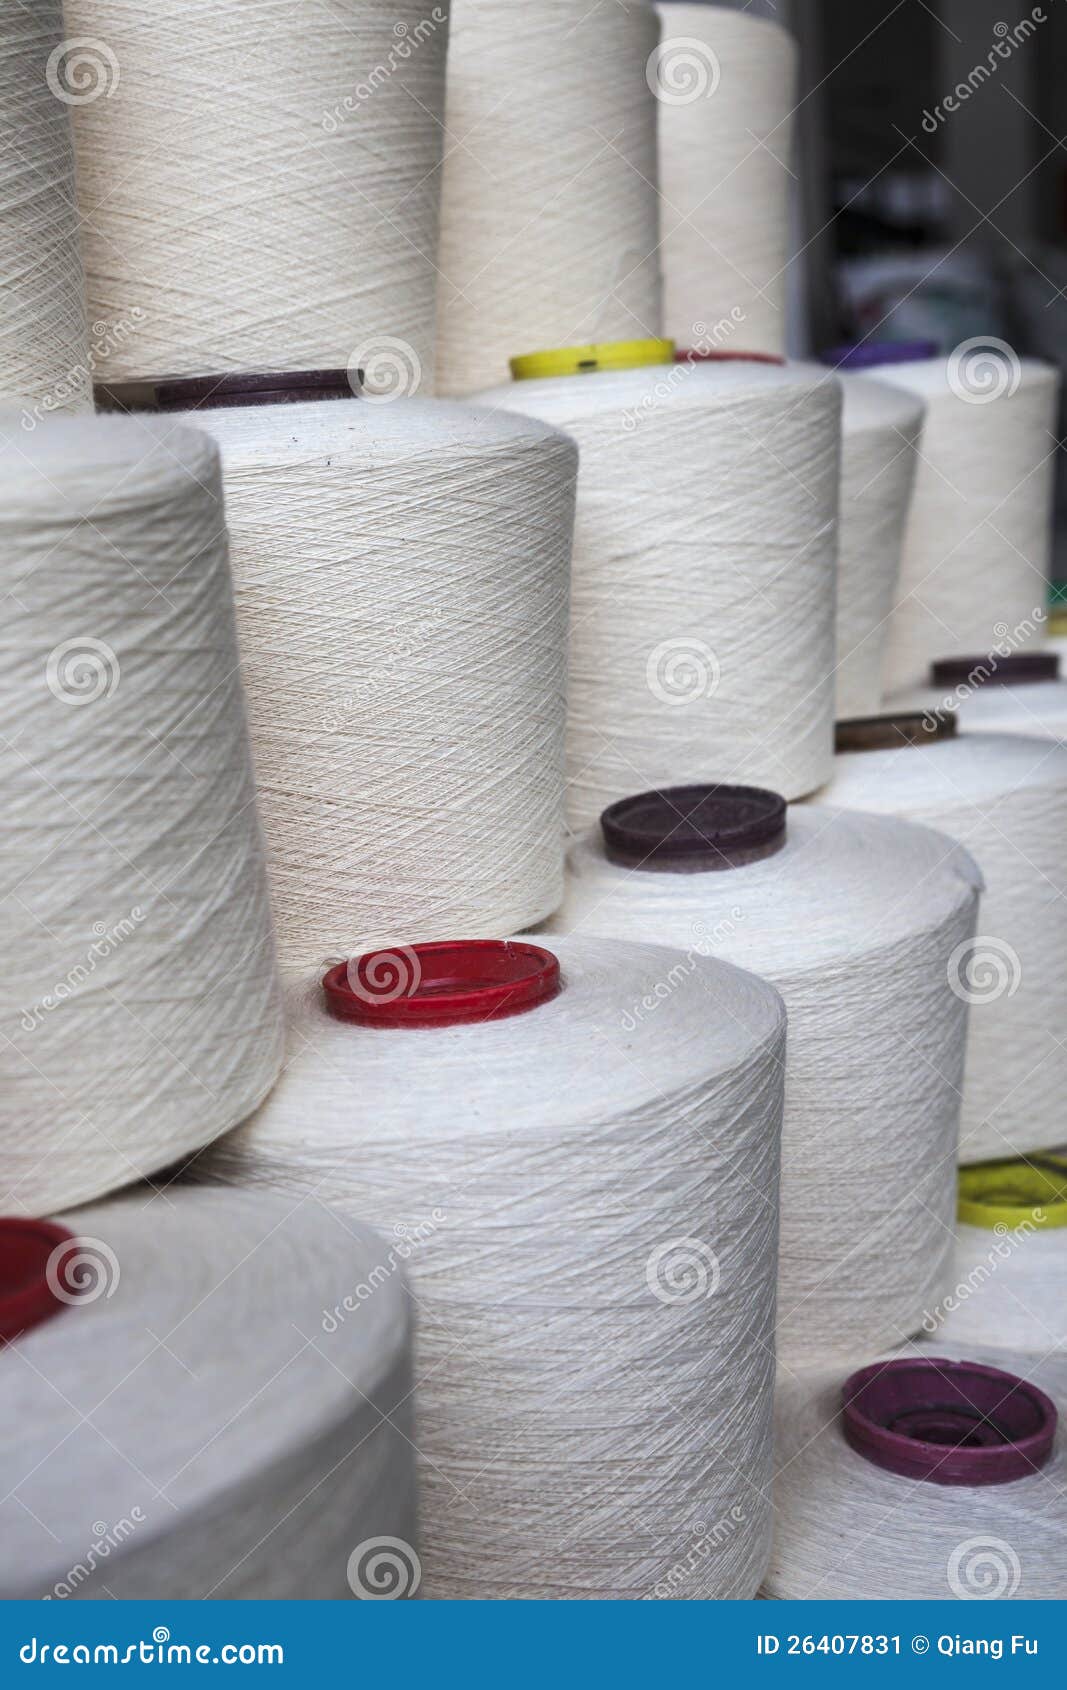 Cotton thread reel stock image. Image of tailor, tool - 26407831